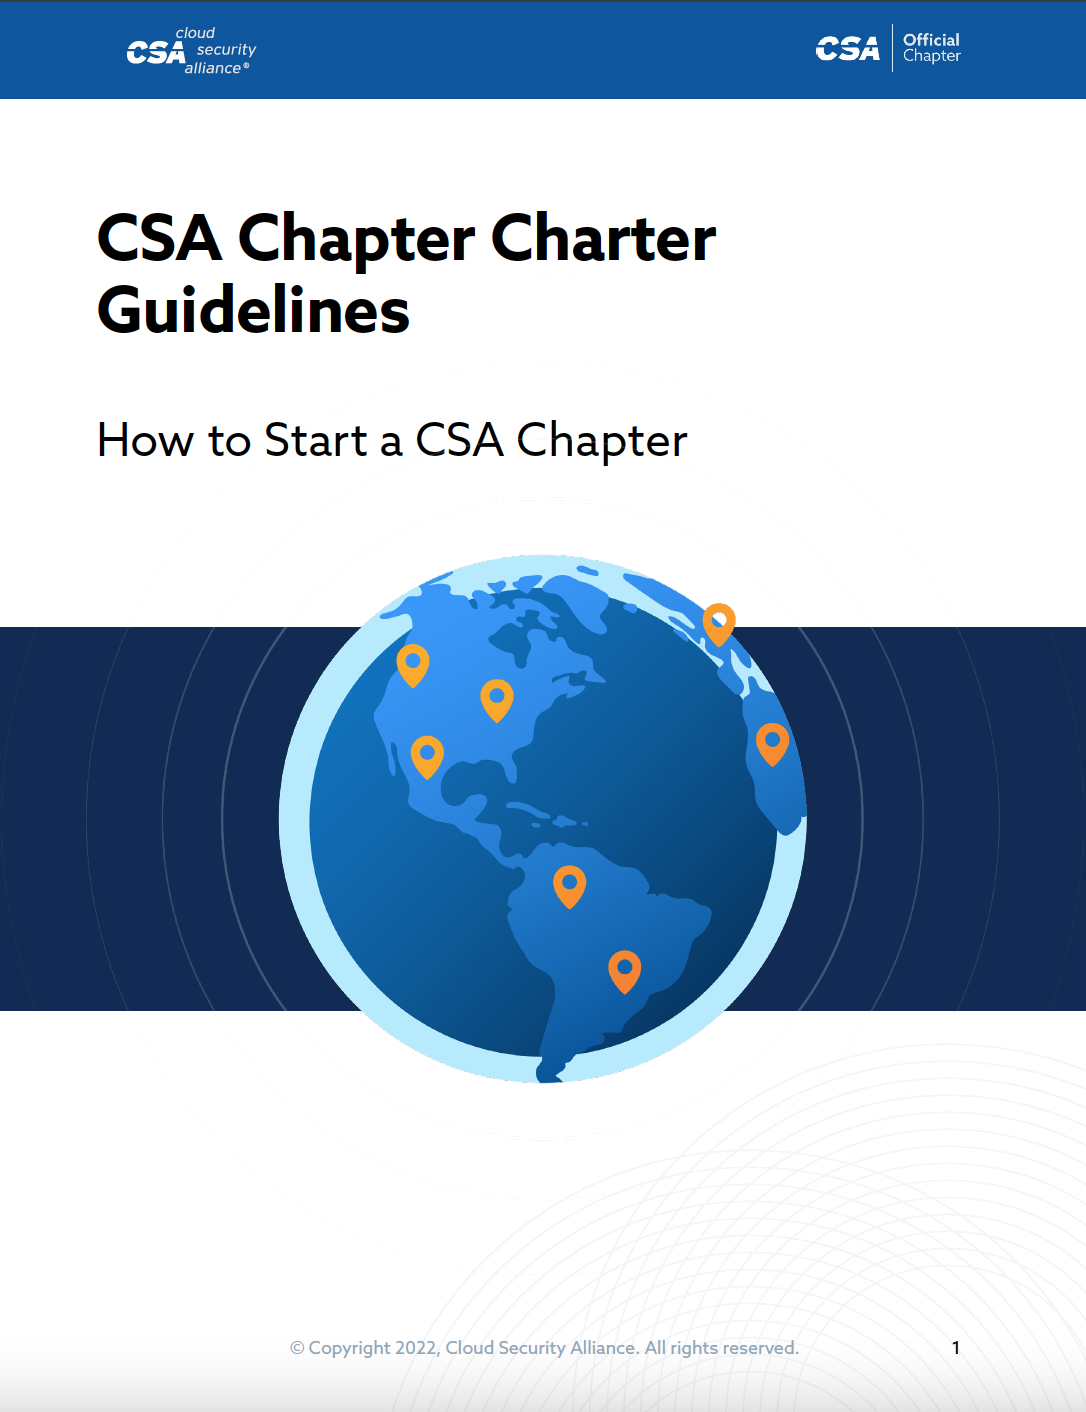 Chapter Chartering Guidelines